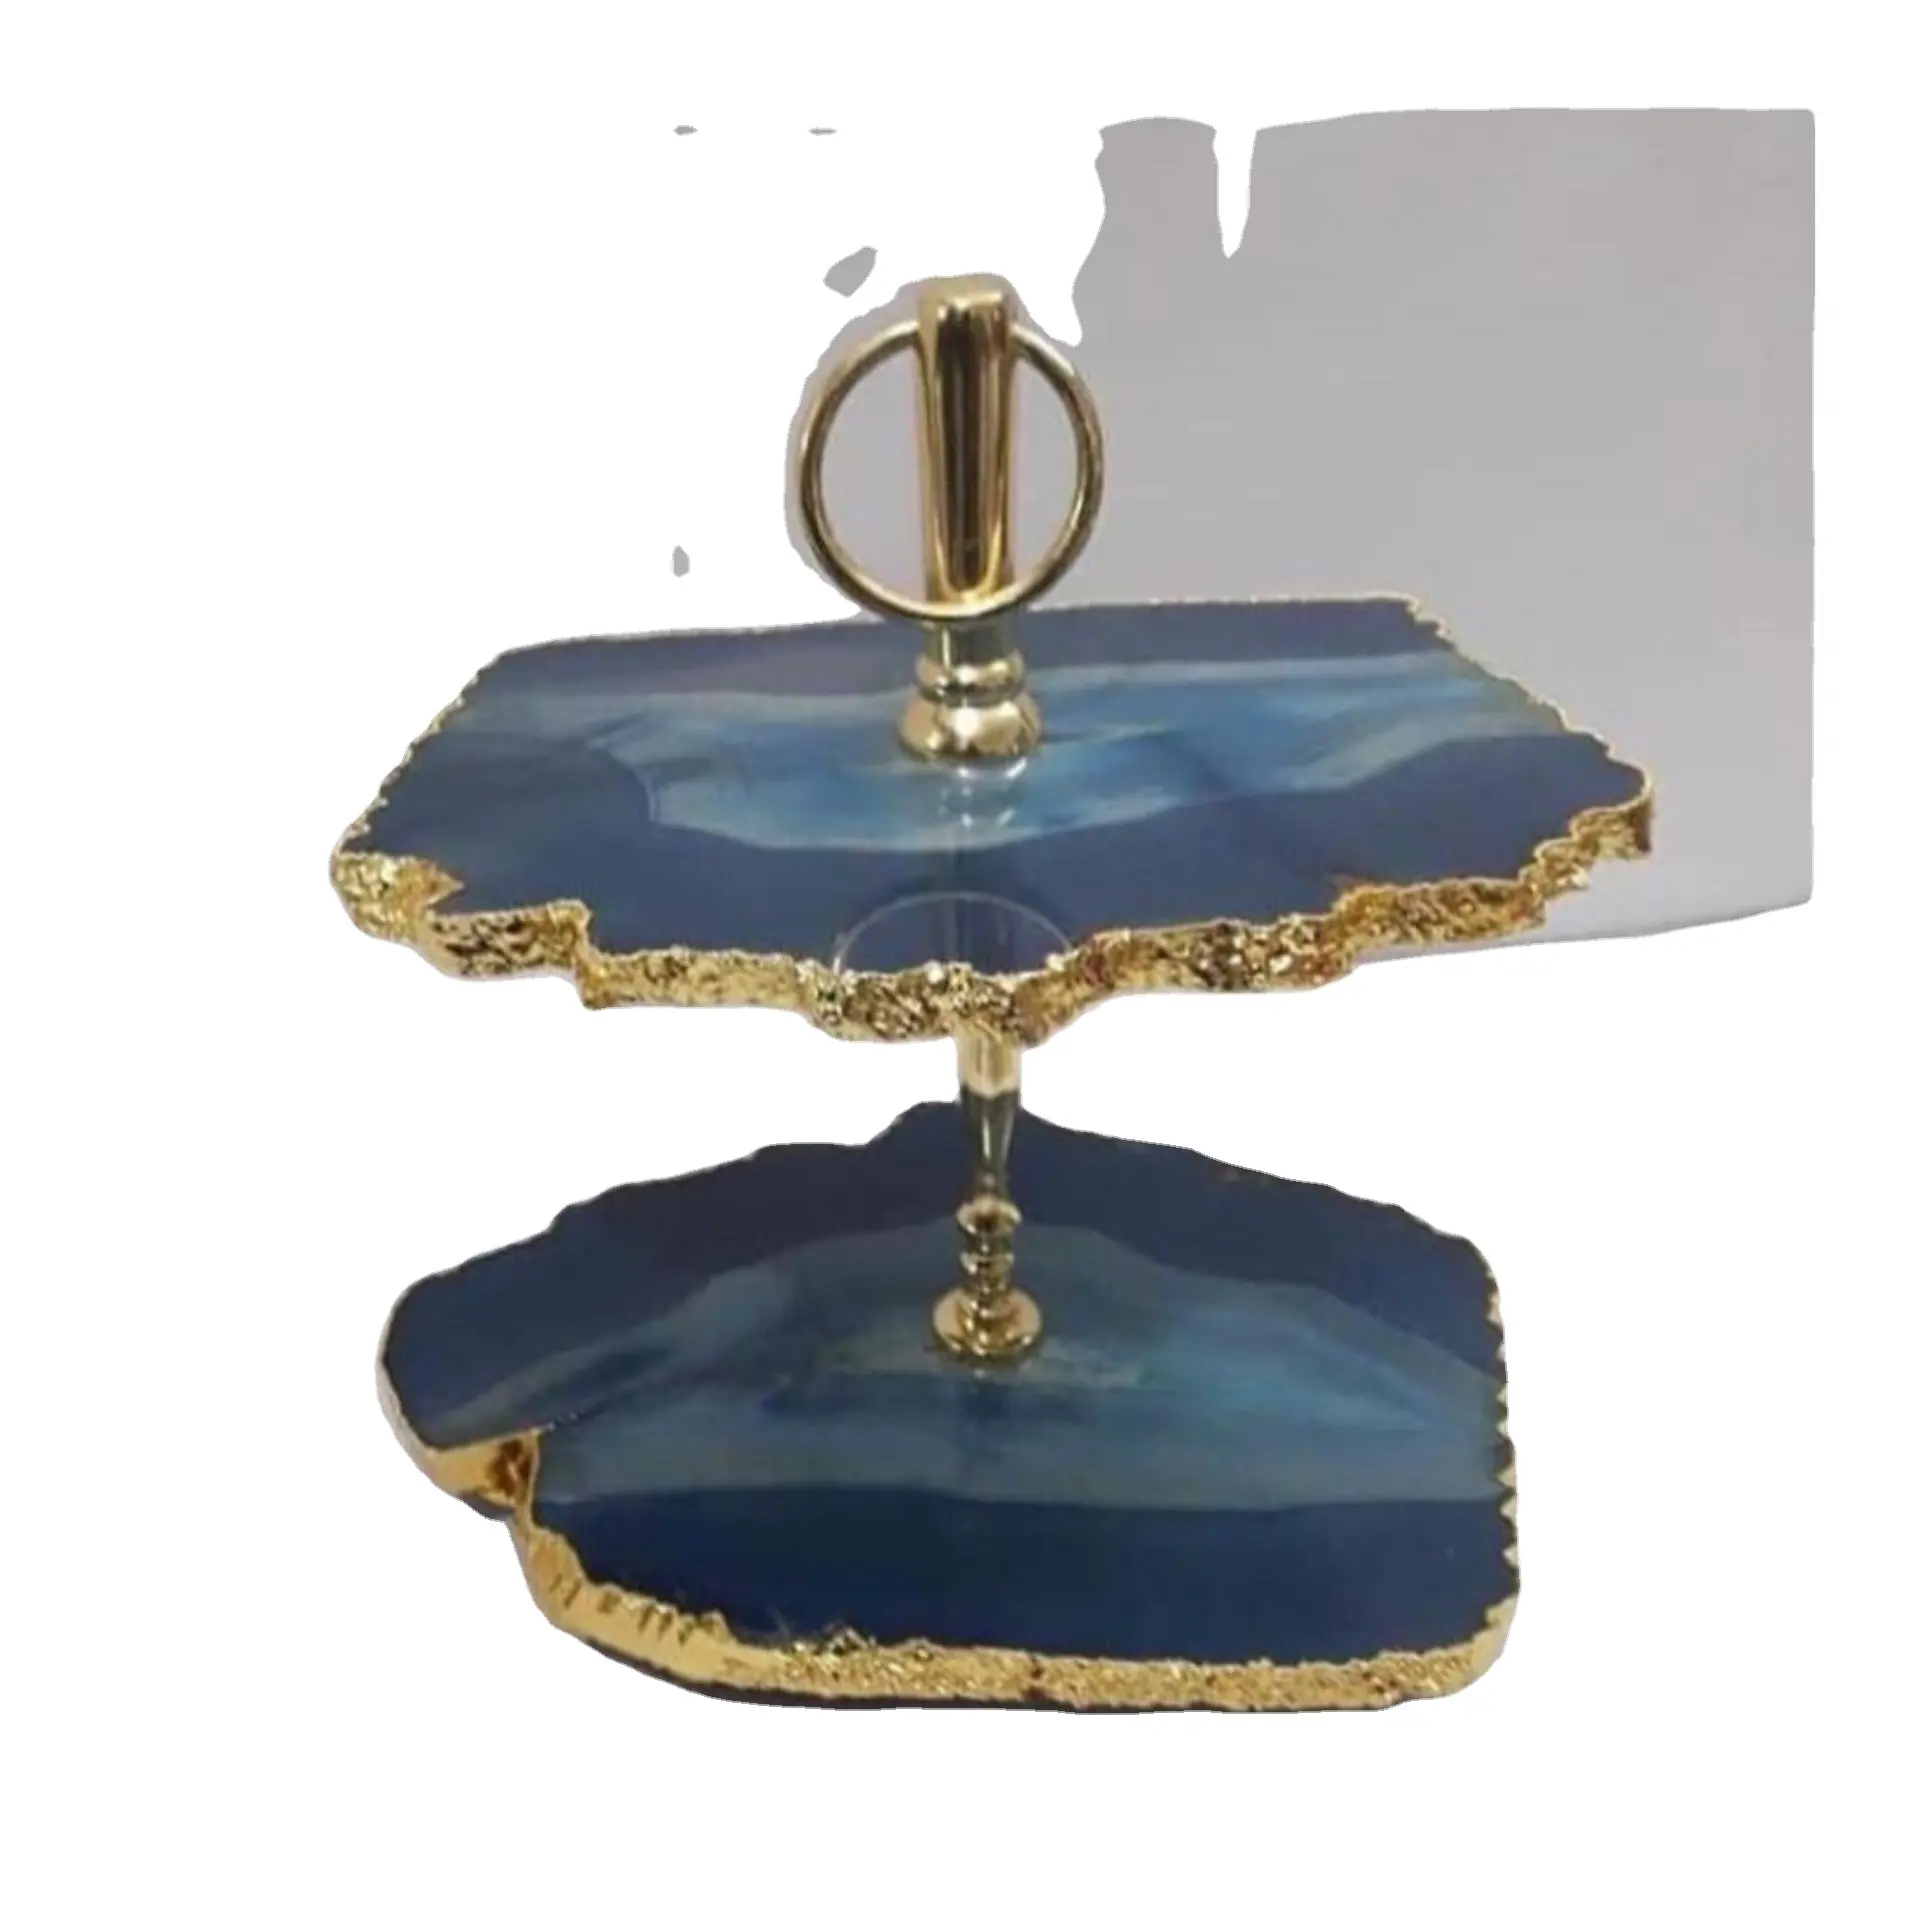 Classic Folding Cake Stand 2Tier for Wedding Parties Hot Sale Blue Resin Cake Tools Round Plate Best Quality at Best price